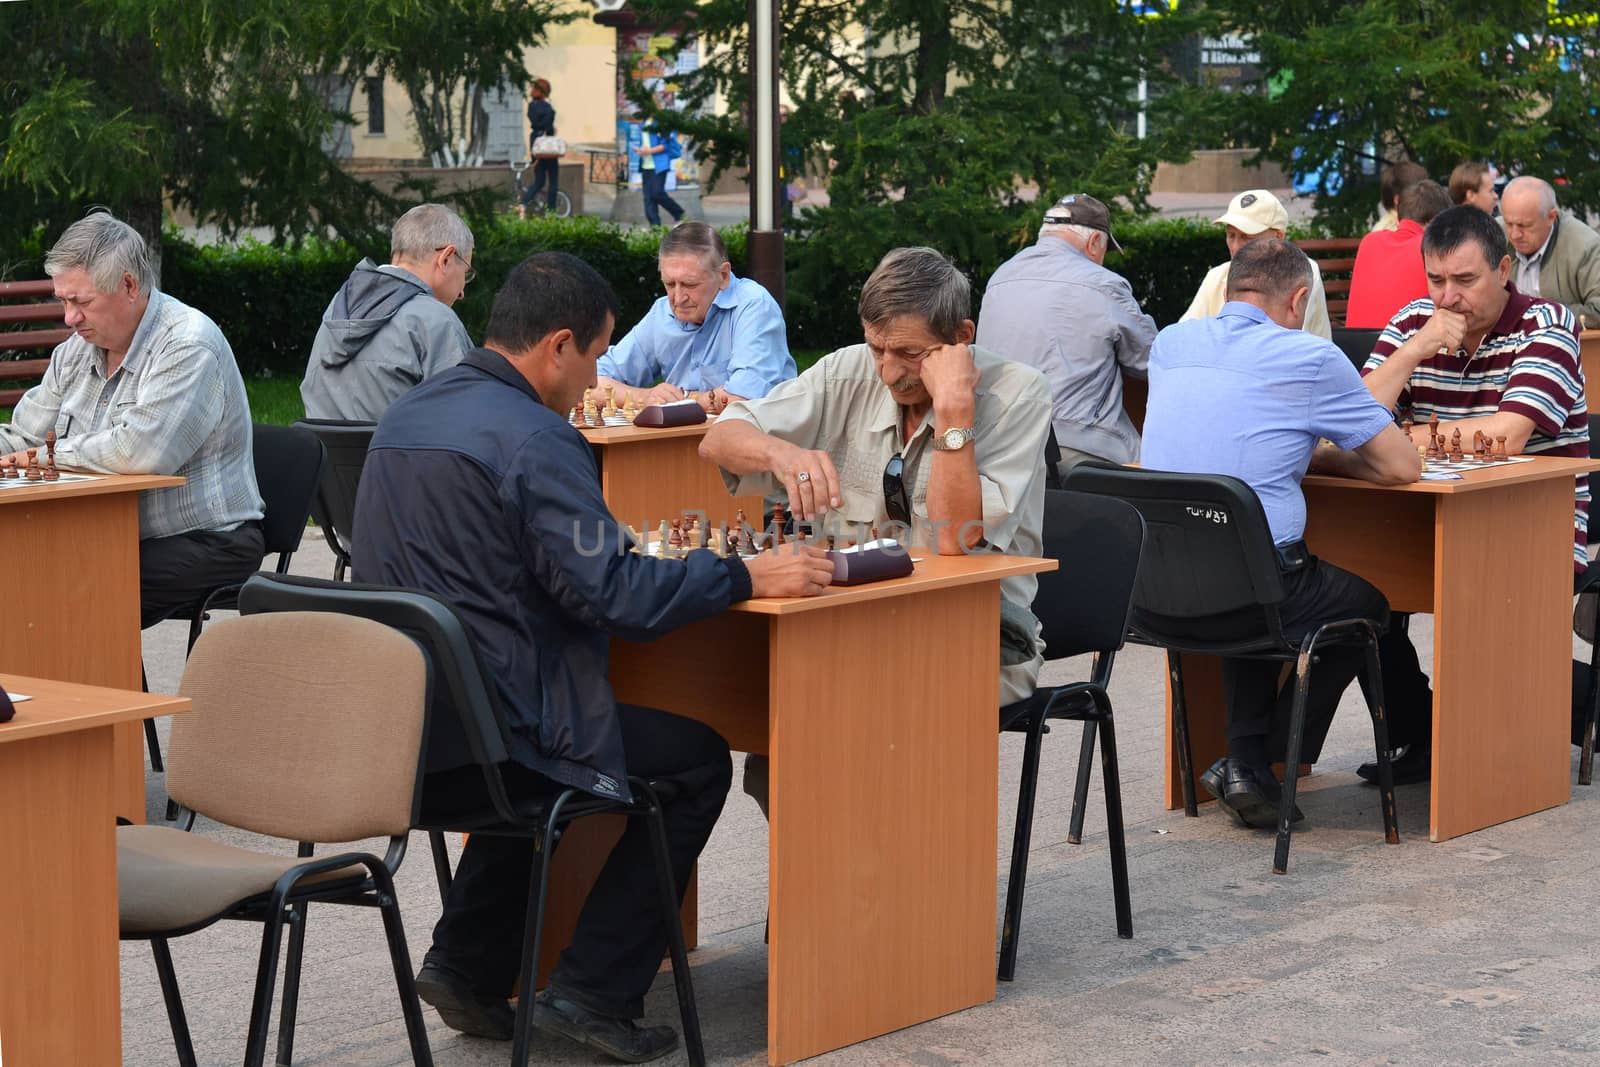 Chess tournament on the street in the summer. by veronka72